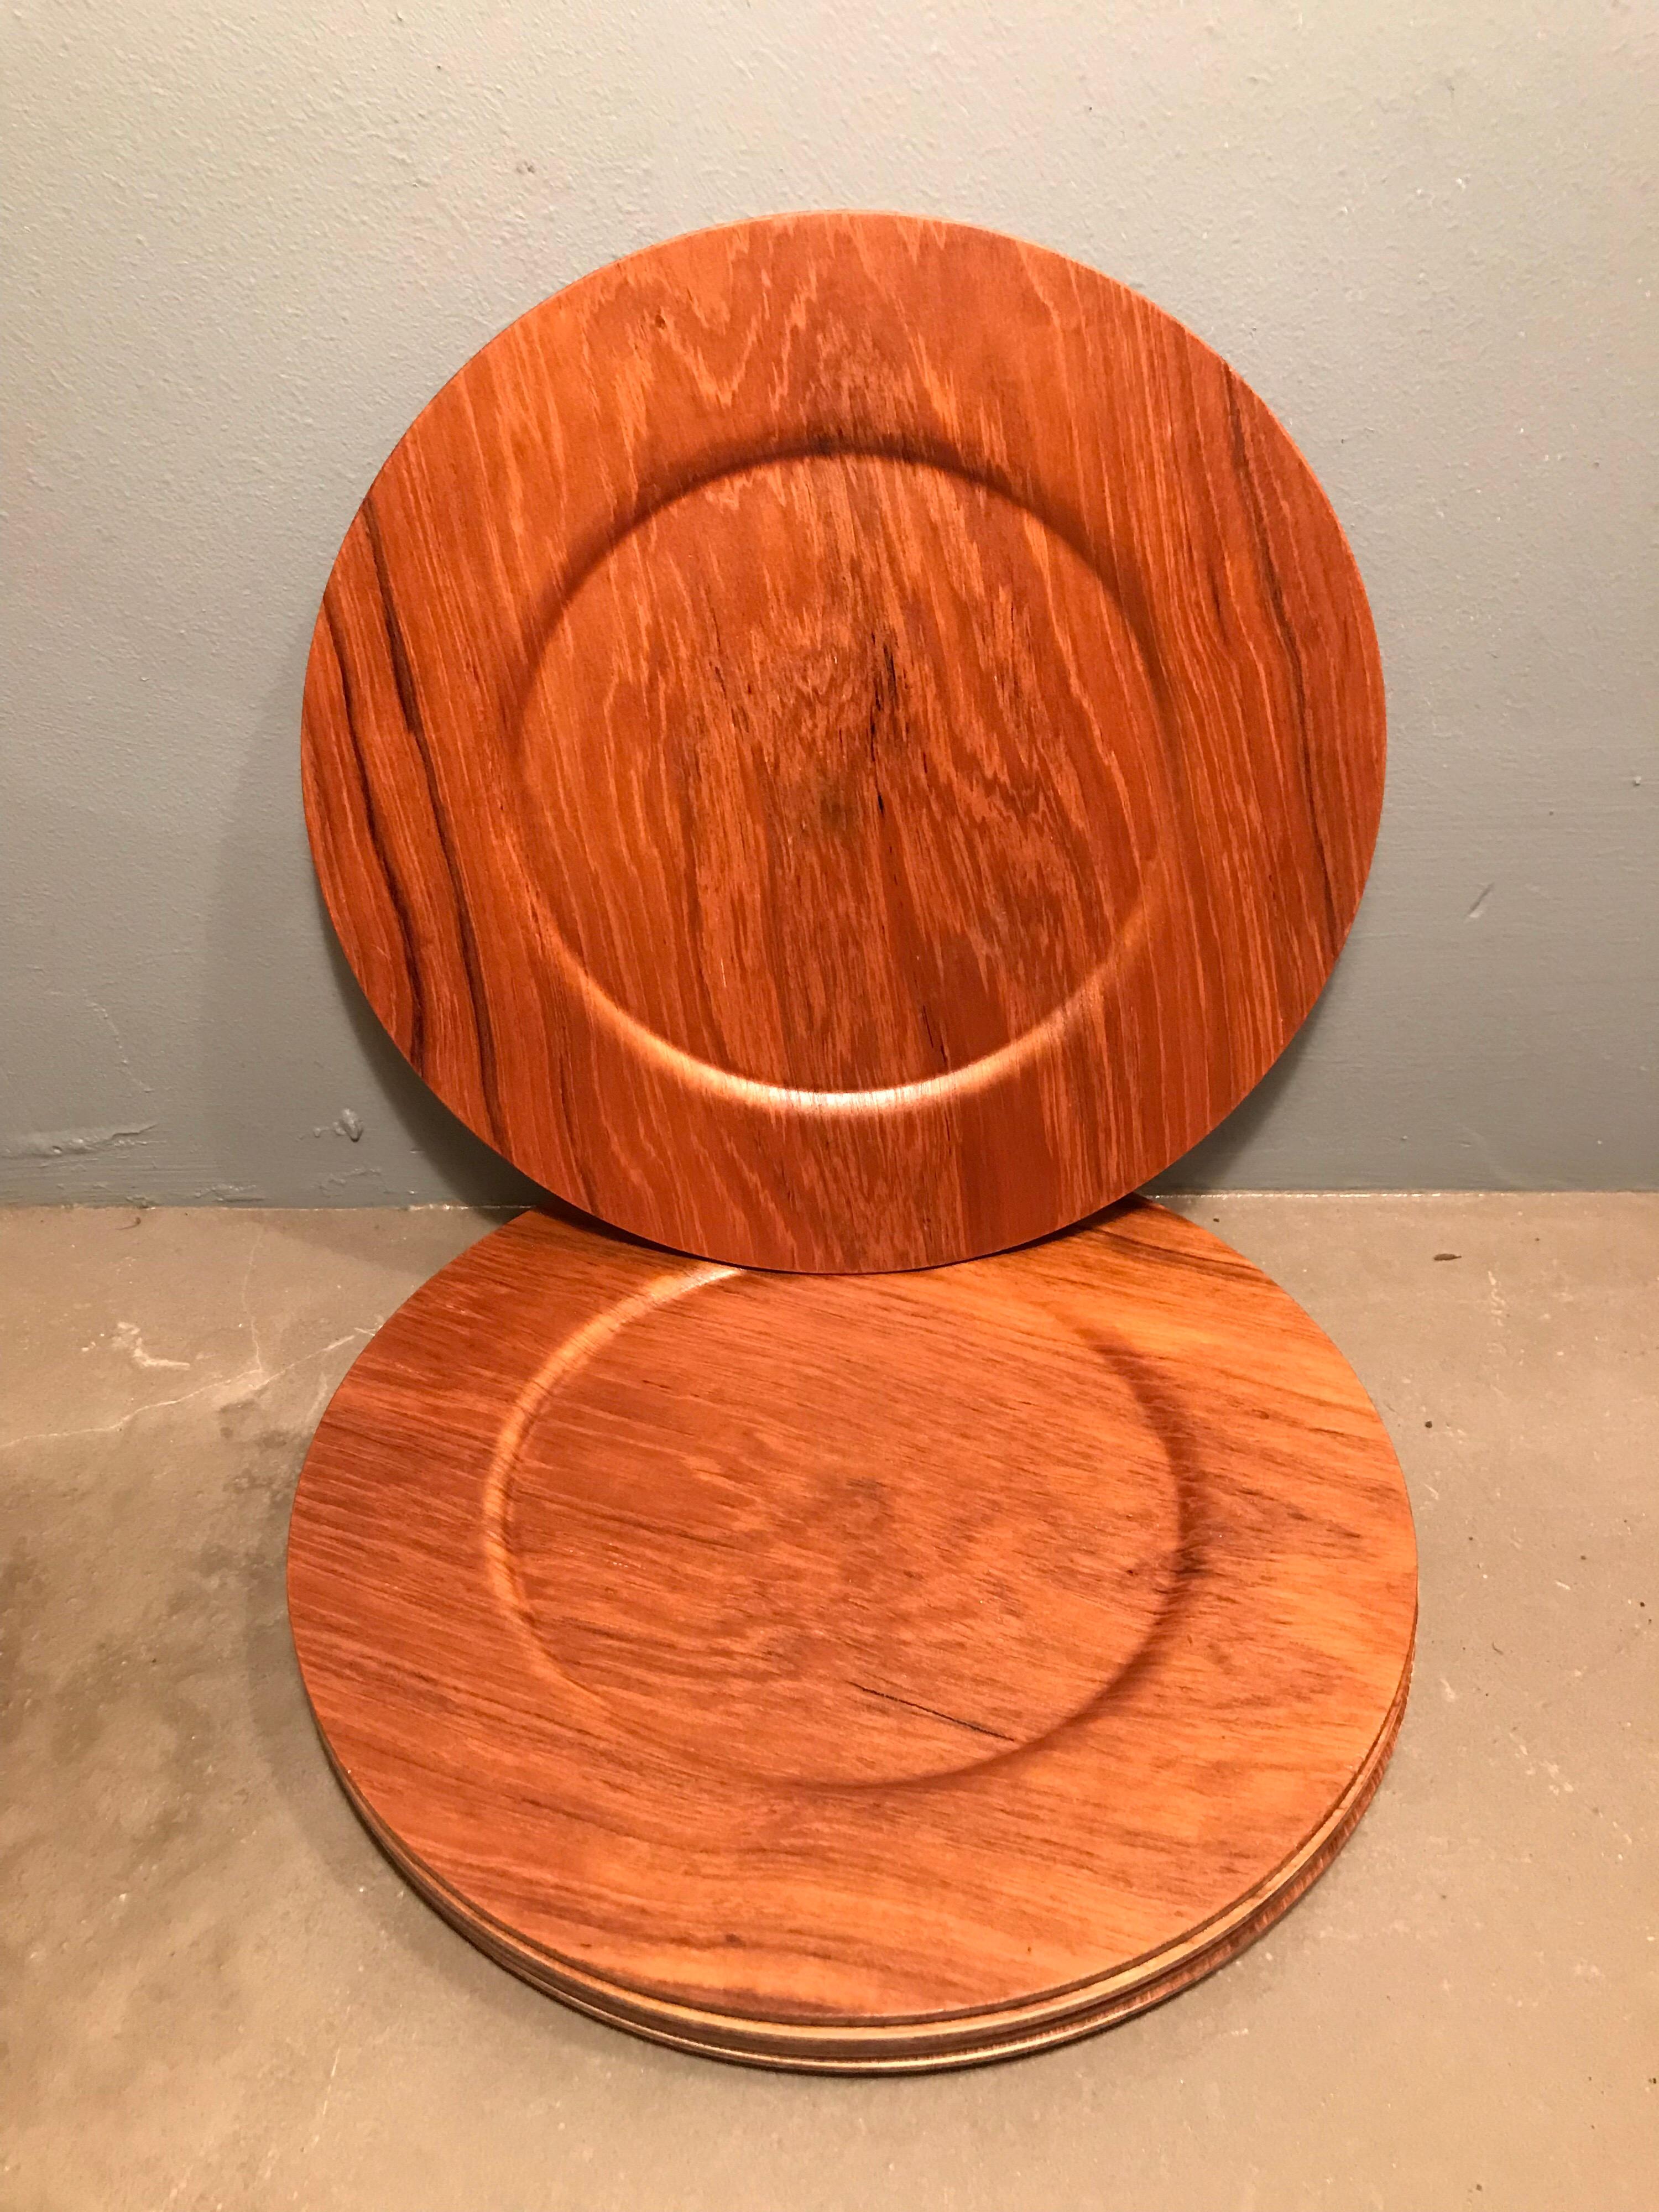 Vintage set of 6 teak plates made by Morsdak of Denmark
In new old stock condition.